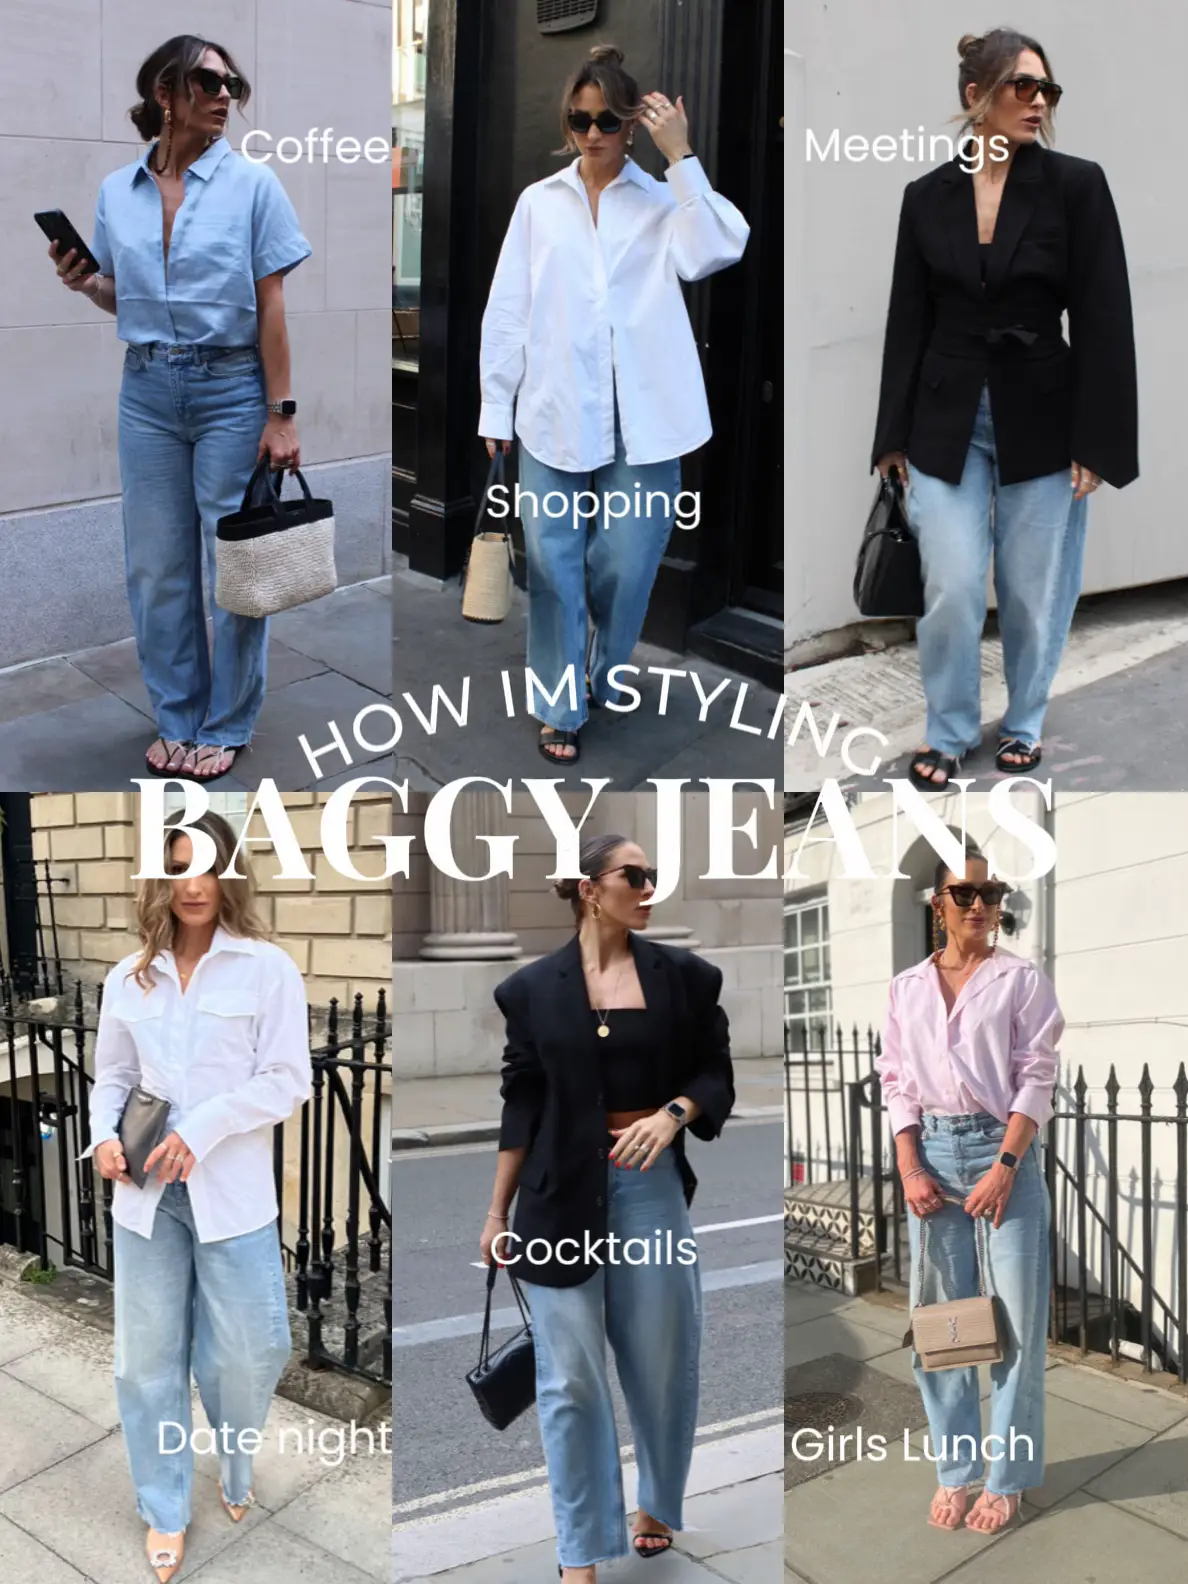 9 Baggy Jeans Outfit Ideas That Are Totally Wearable  Jeans outfit women,  Jeans and t shirt outfit, Jeans outfit casual